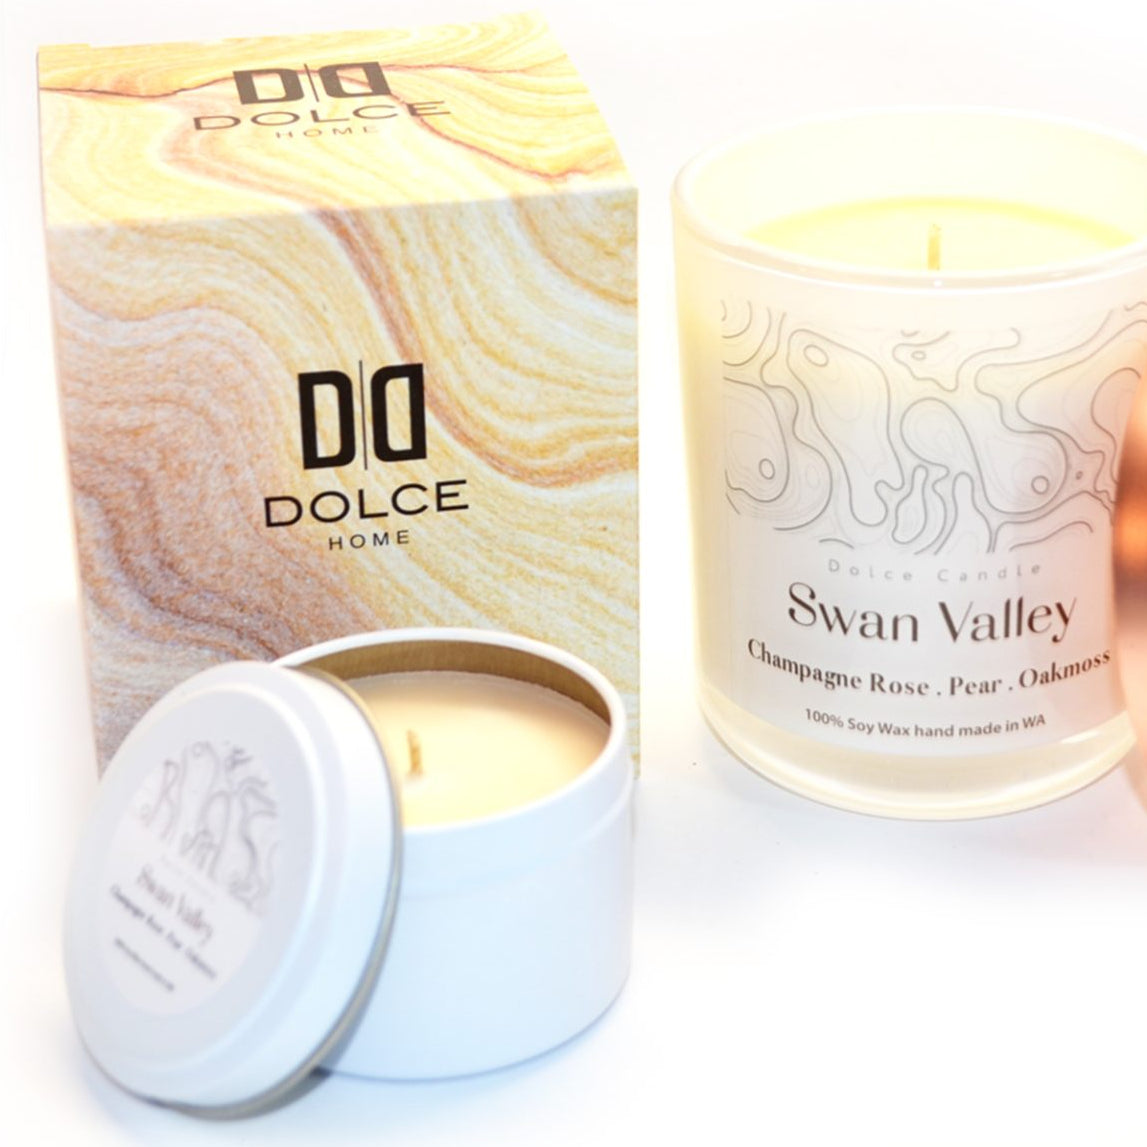 Swan Valley | 300g Soy Wax Candle | Dolce Home | Handmade in W.A.